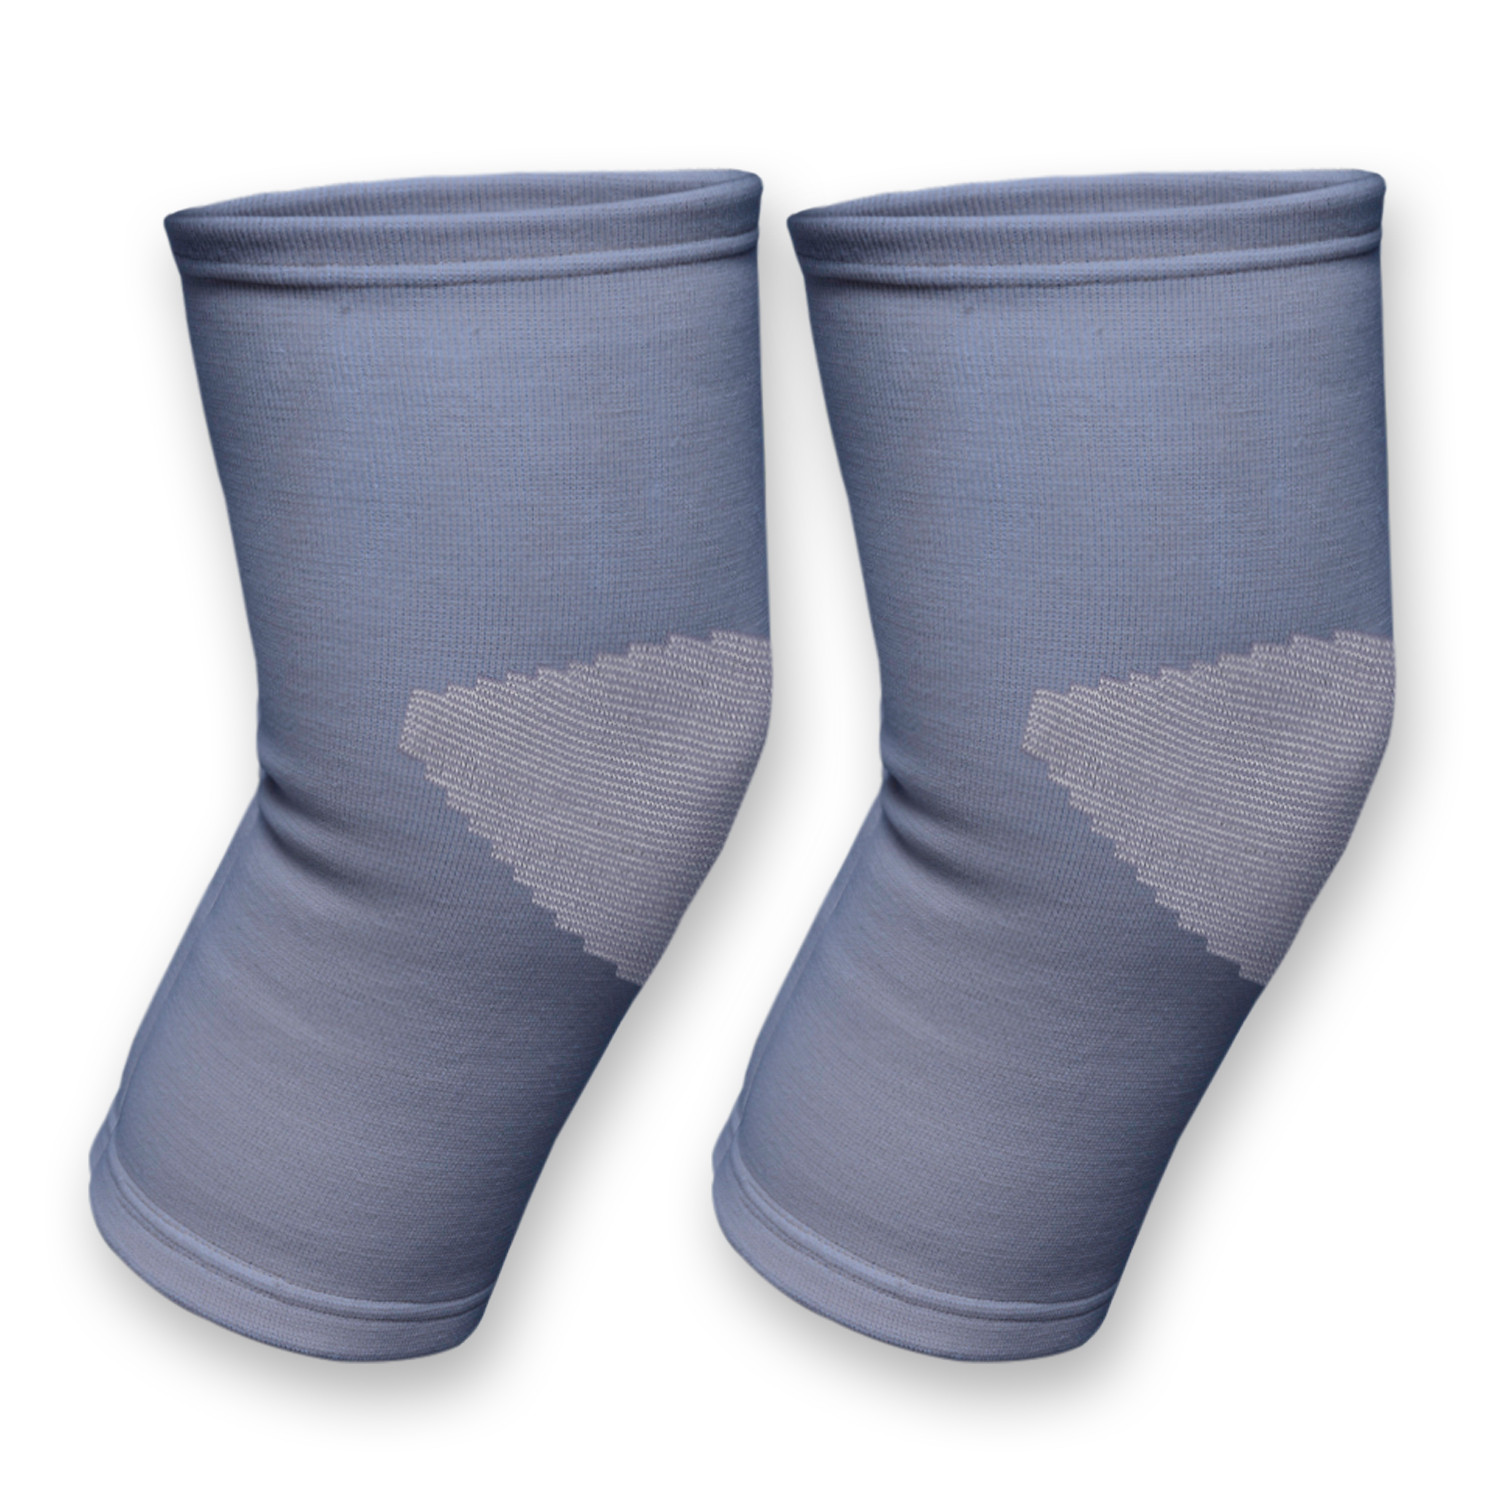 Kuber Industries 3D Knee Cap | Cotton Knee Sleeves |Sleeves For Joint Pain | Sleeves For Arthritis Relief | Unisex Knee Wraps | Knee Bands | Size-M | 1 Pair | Gray & White